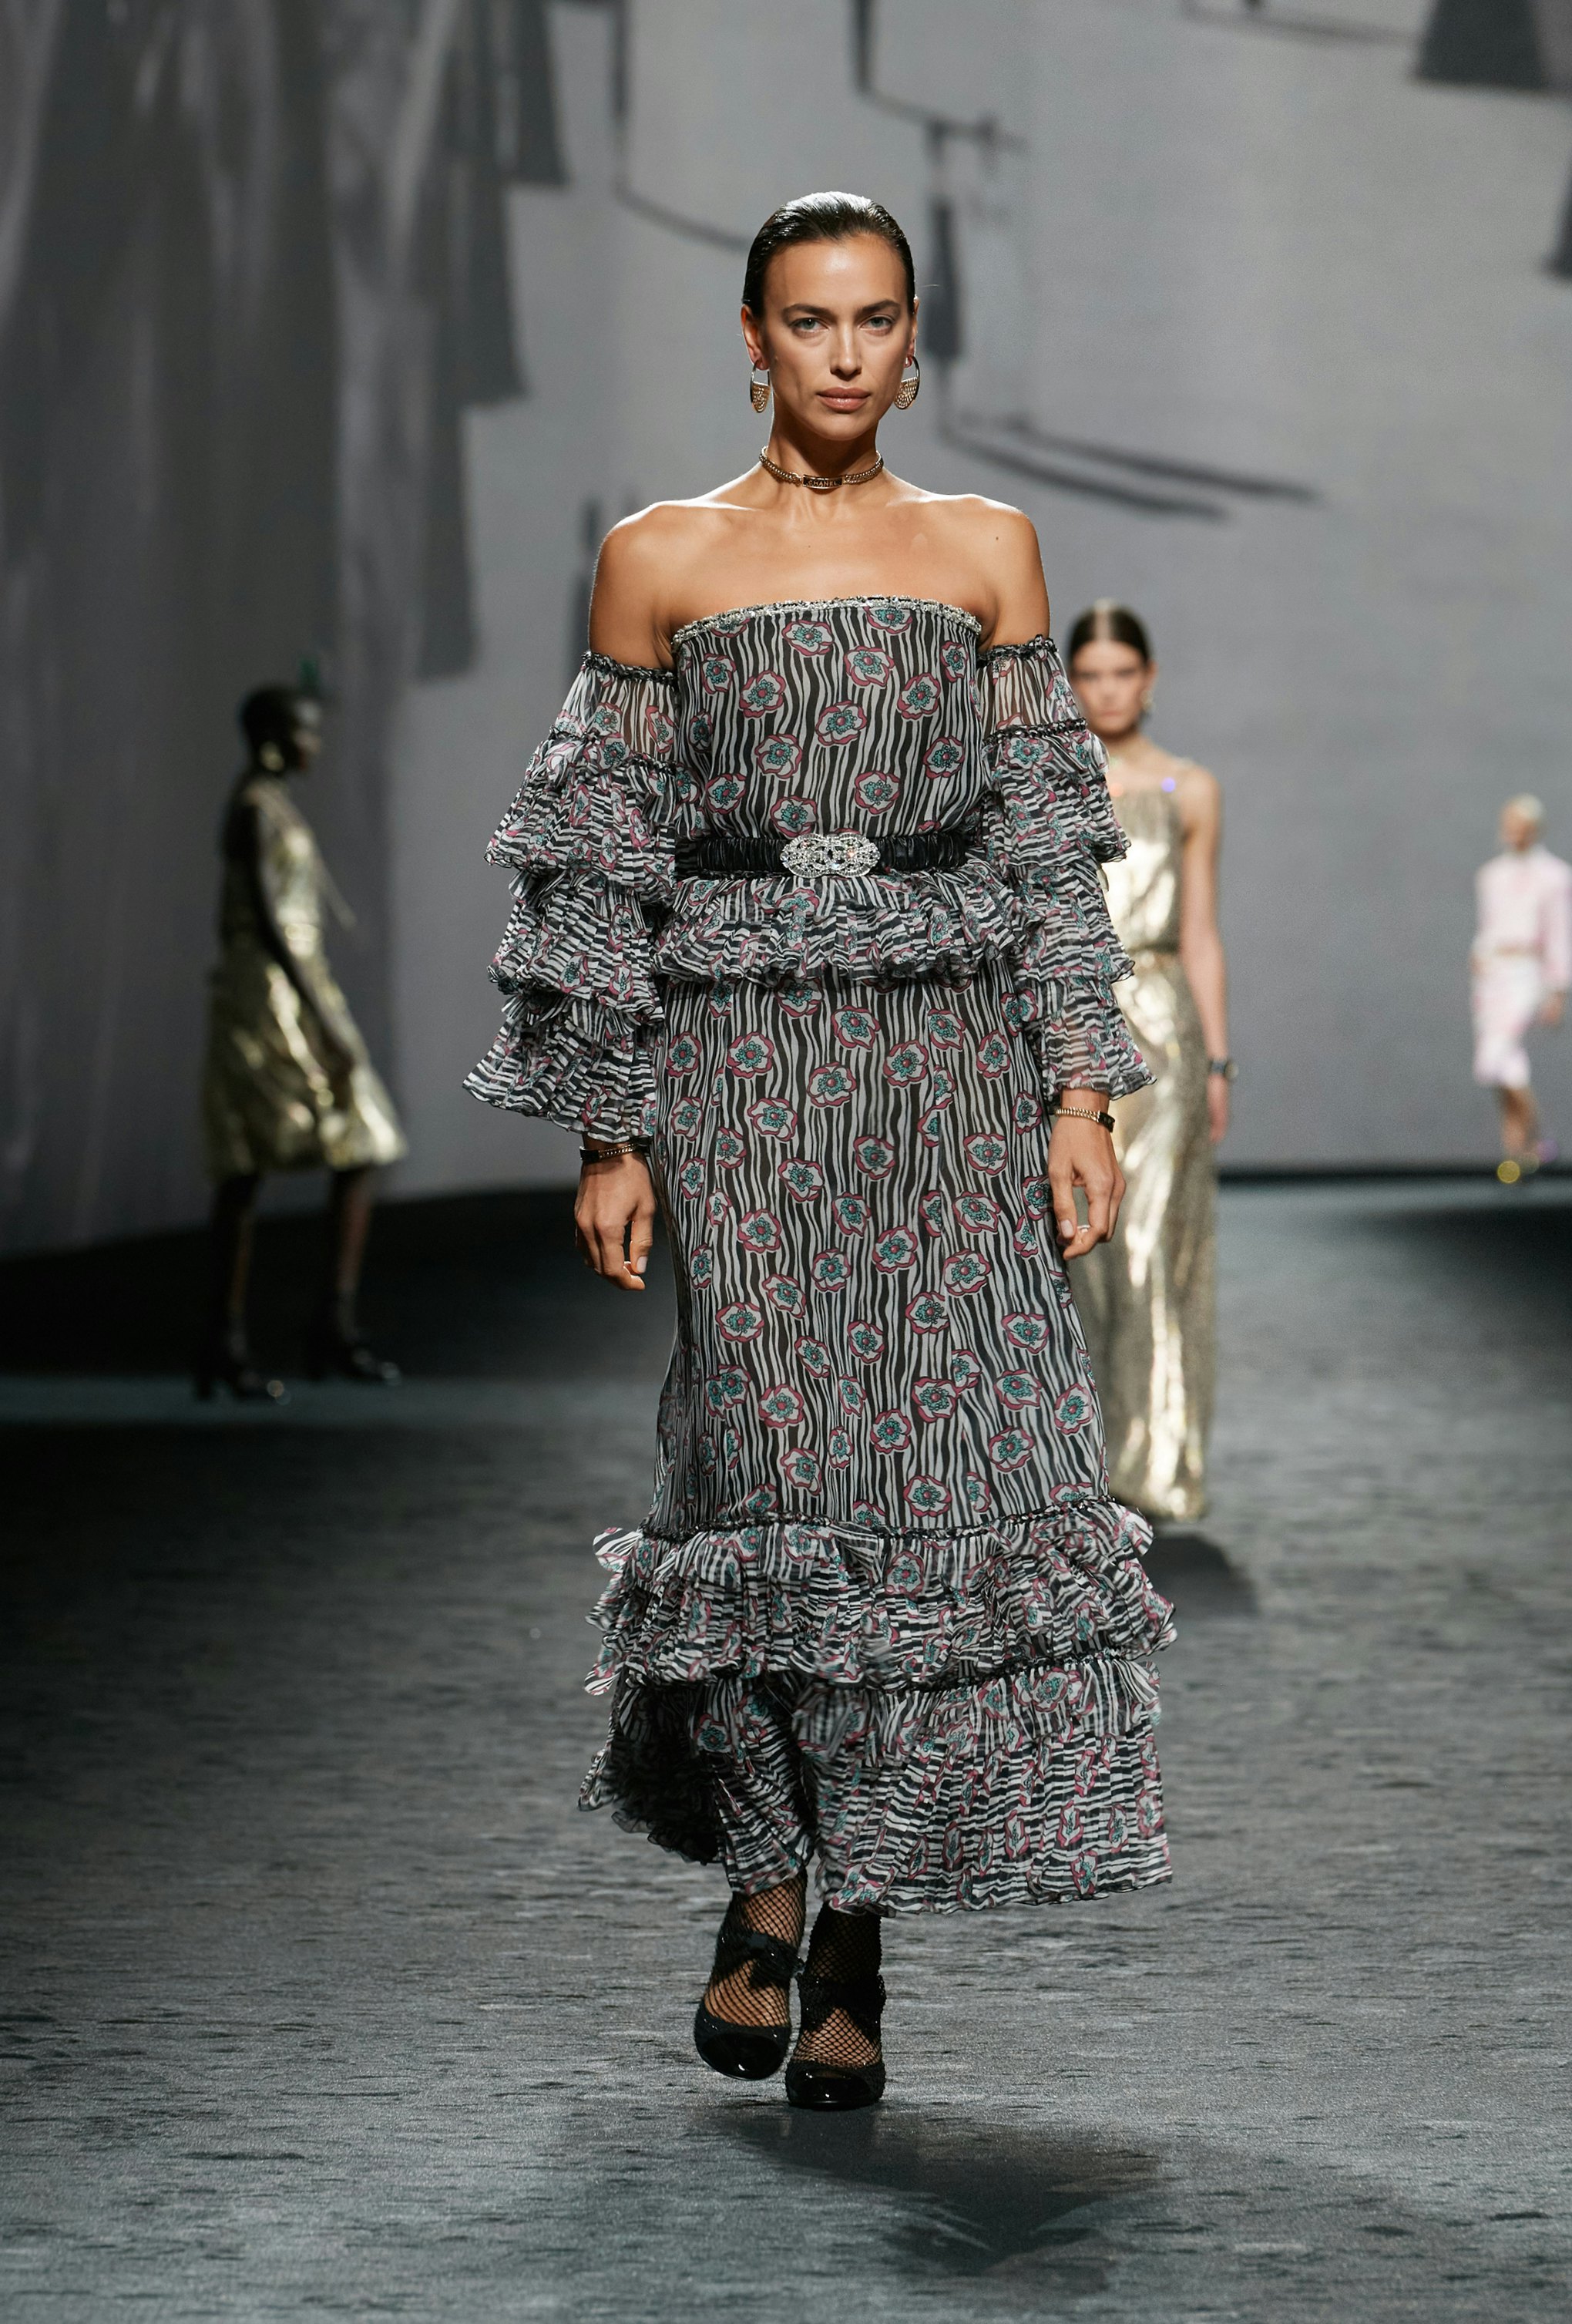 Highlights from Chanels cruise 2023 show in Monaco